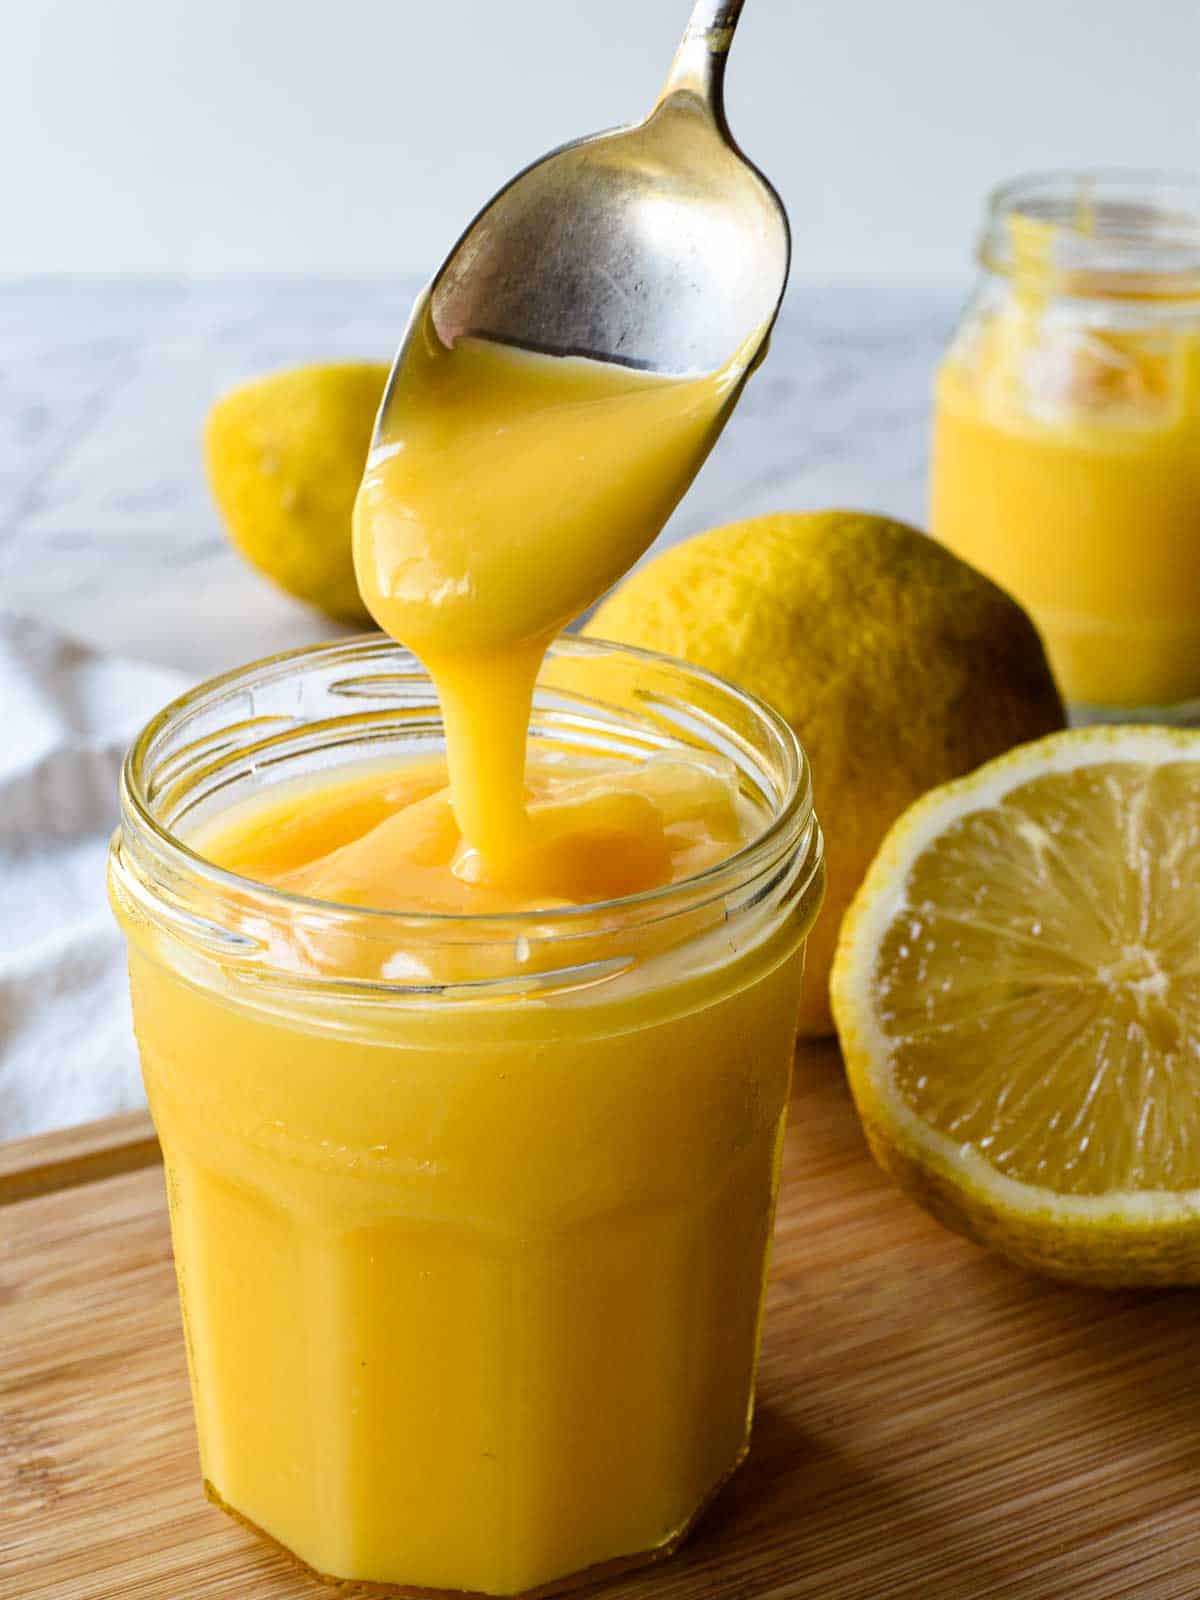 Lemon curd being spooned into a in glass jar with sliced and whole lemons in the background.